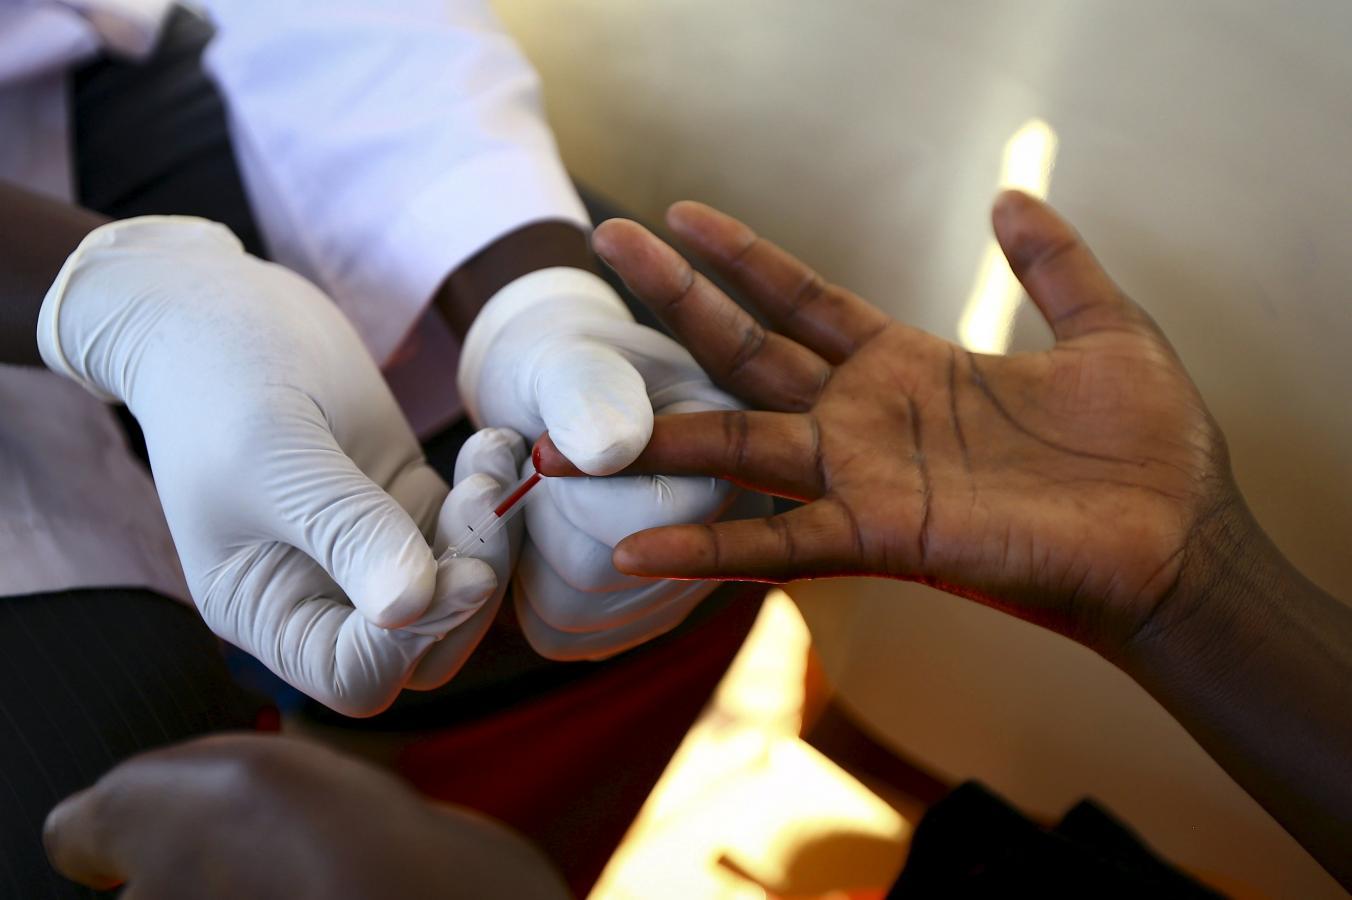 Africa to get state-of-art HIV drugs for $75 a year